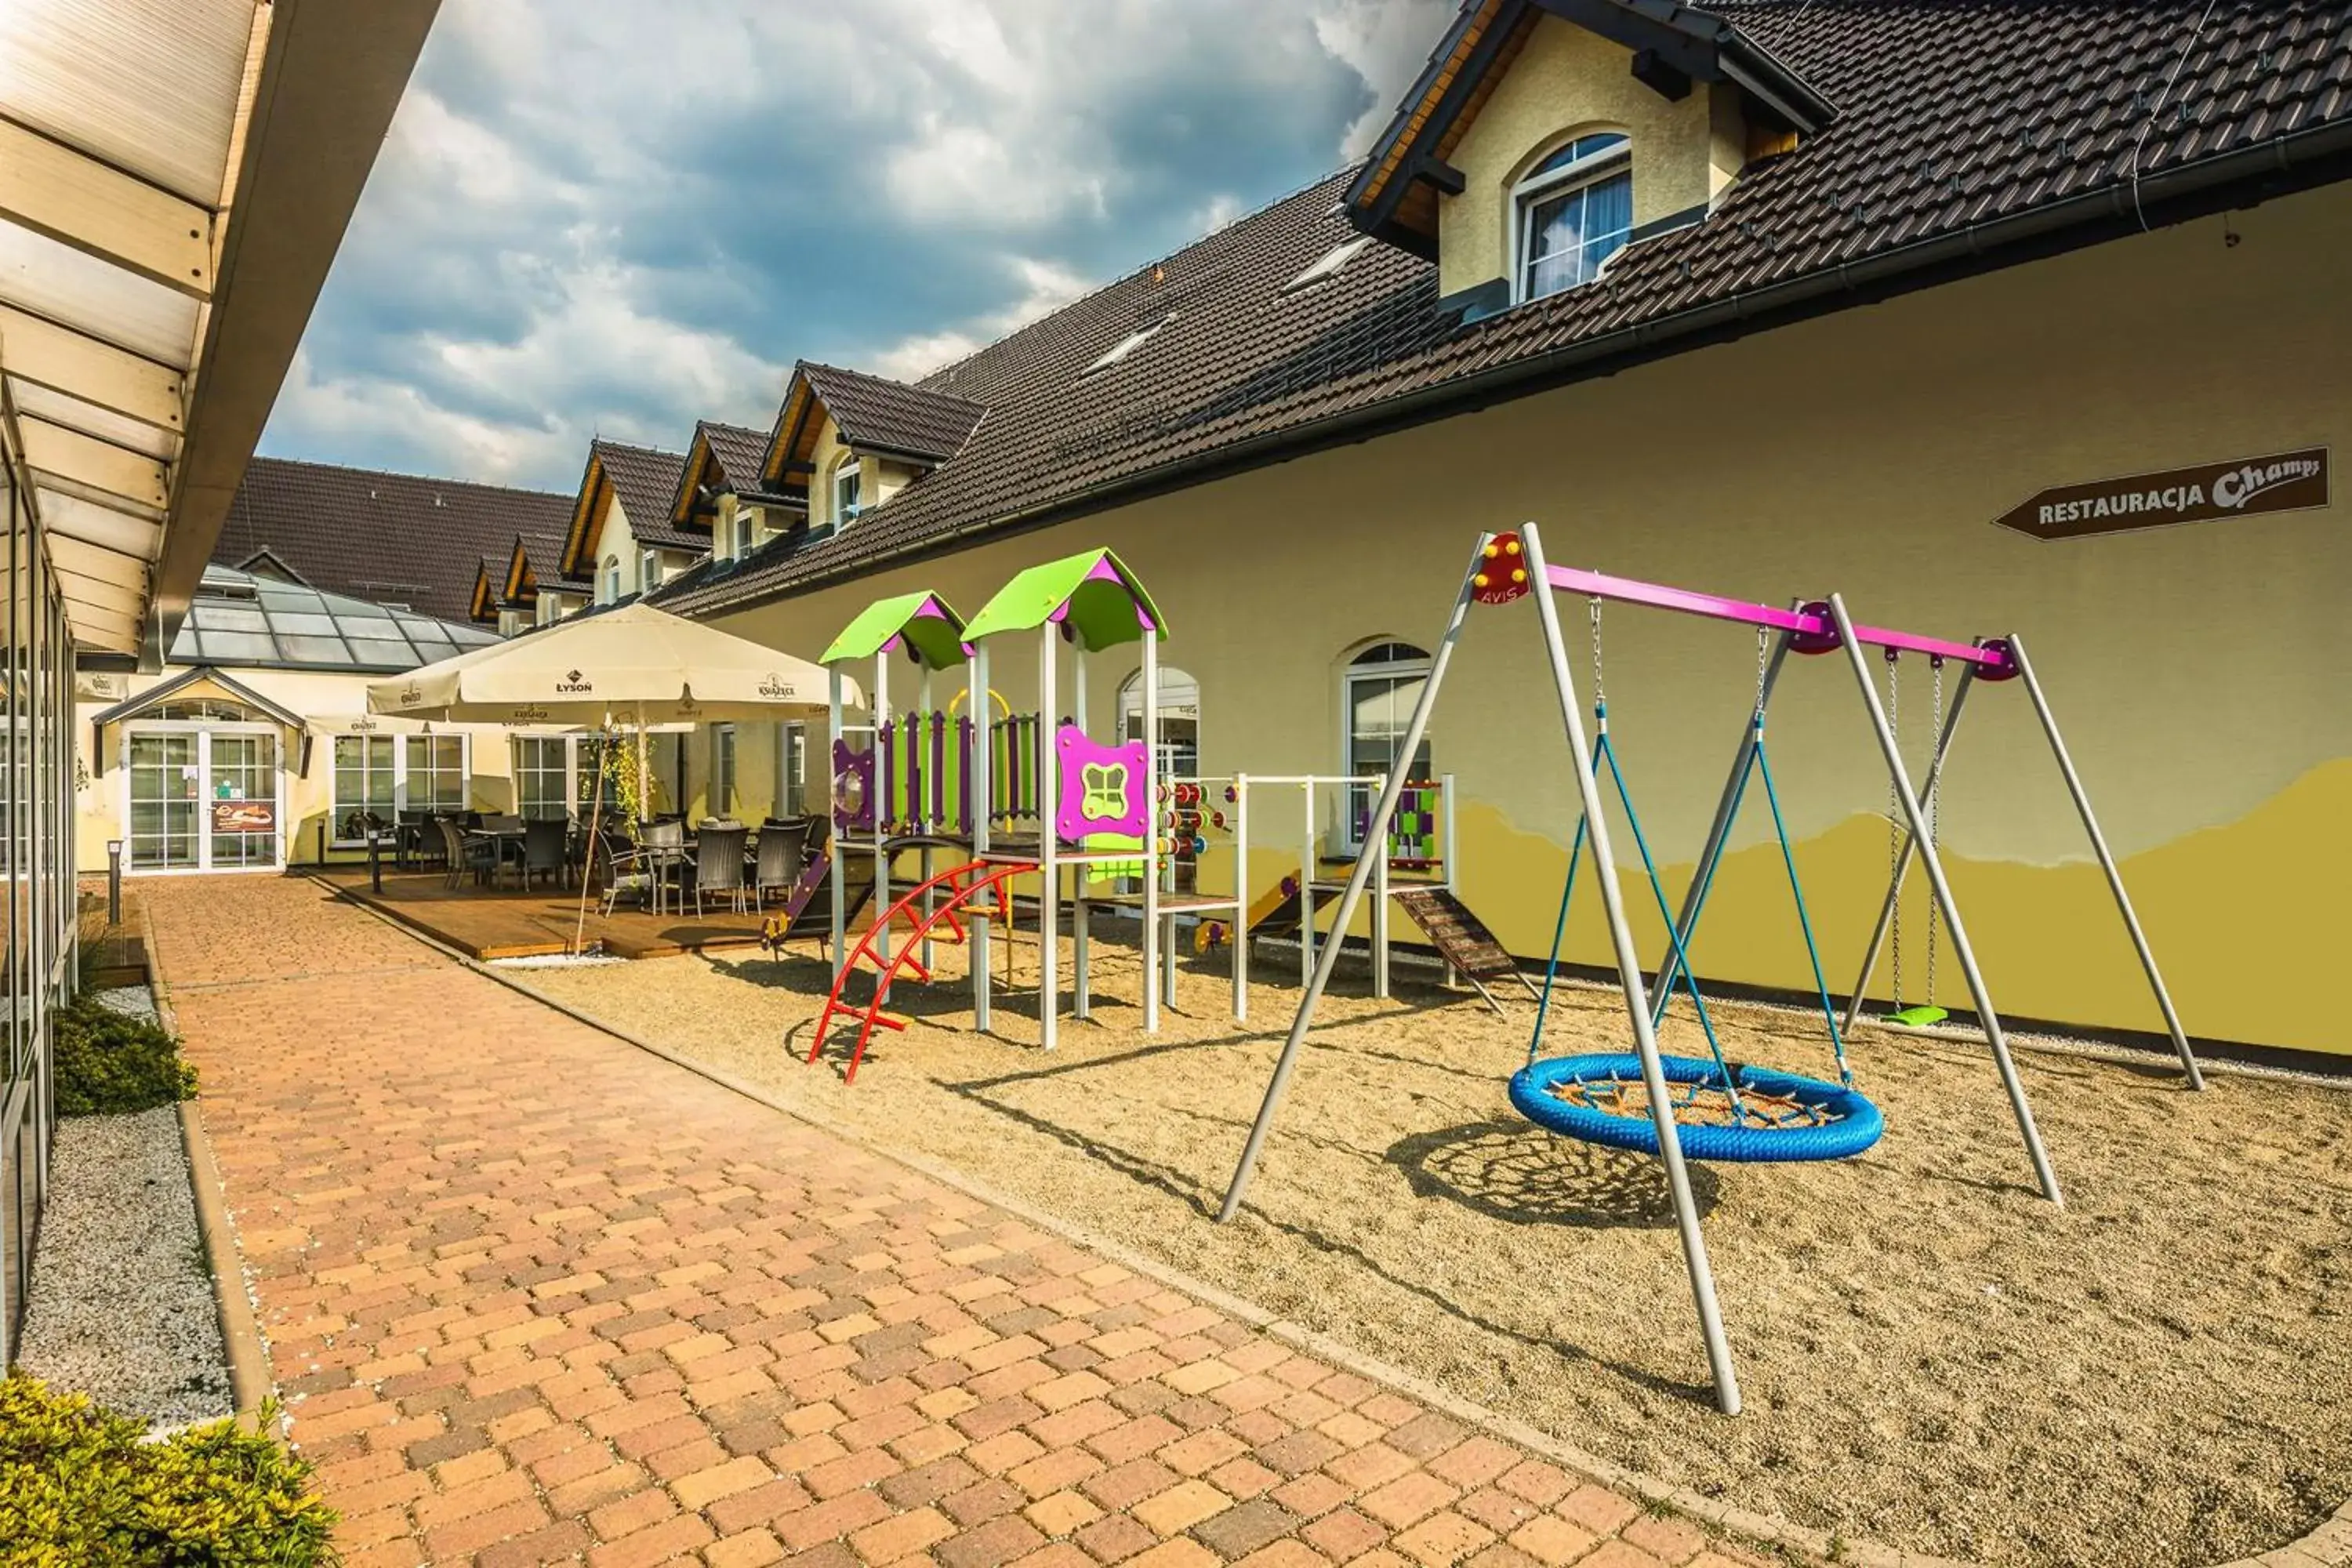 Children's Play Area in ParkHotel yso